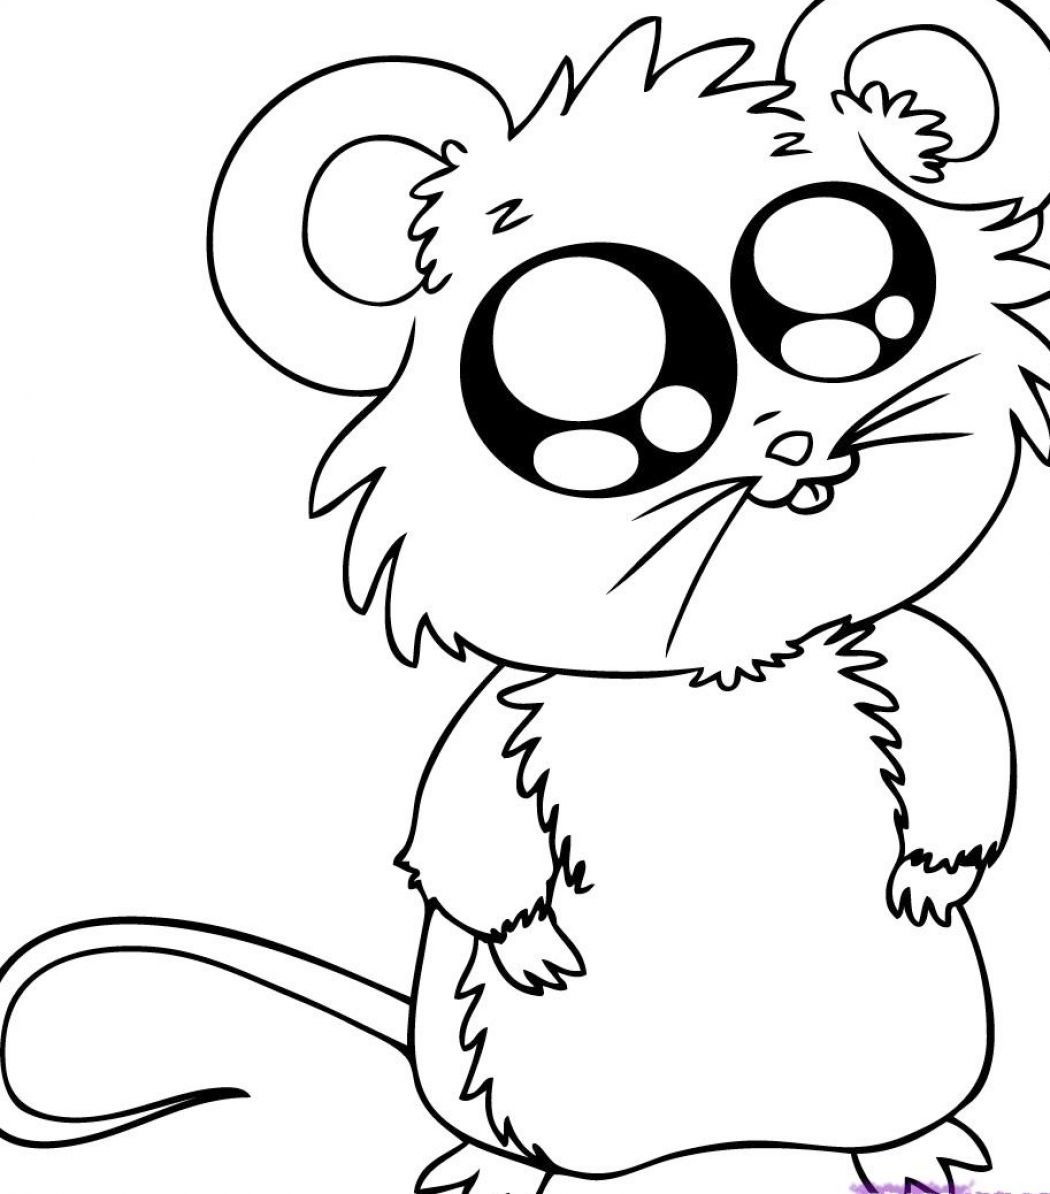 Free Funny Animal Coloring Page, Download Free Funny Animal Coloring